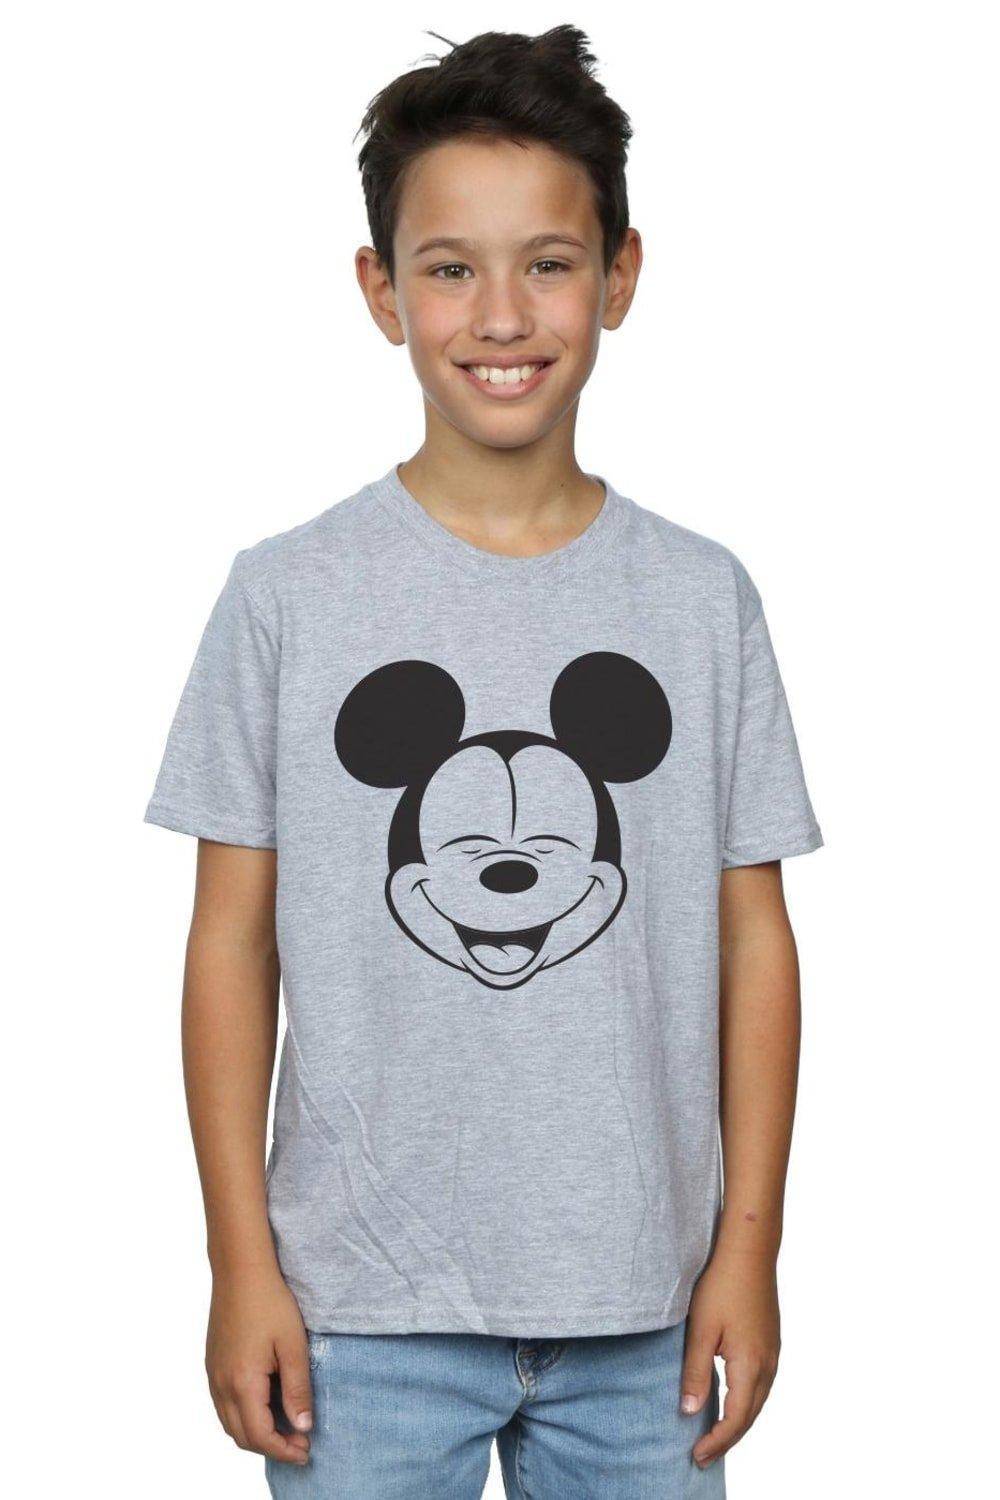 Mickey Mouse Closed Eyes T-Shirt